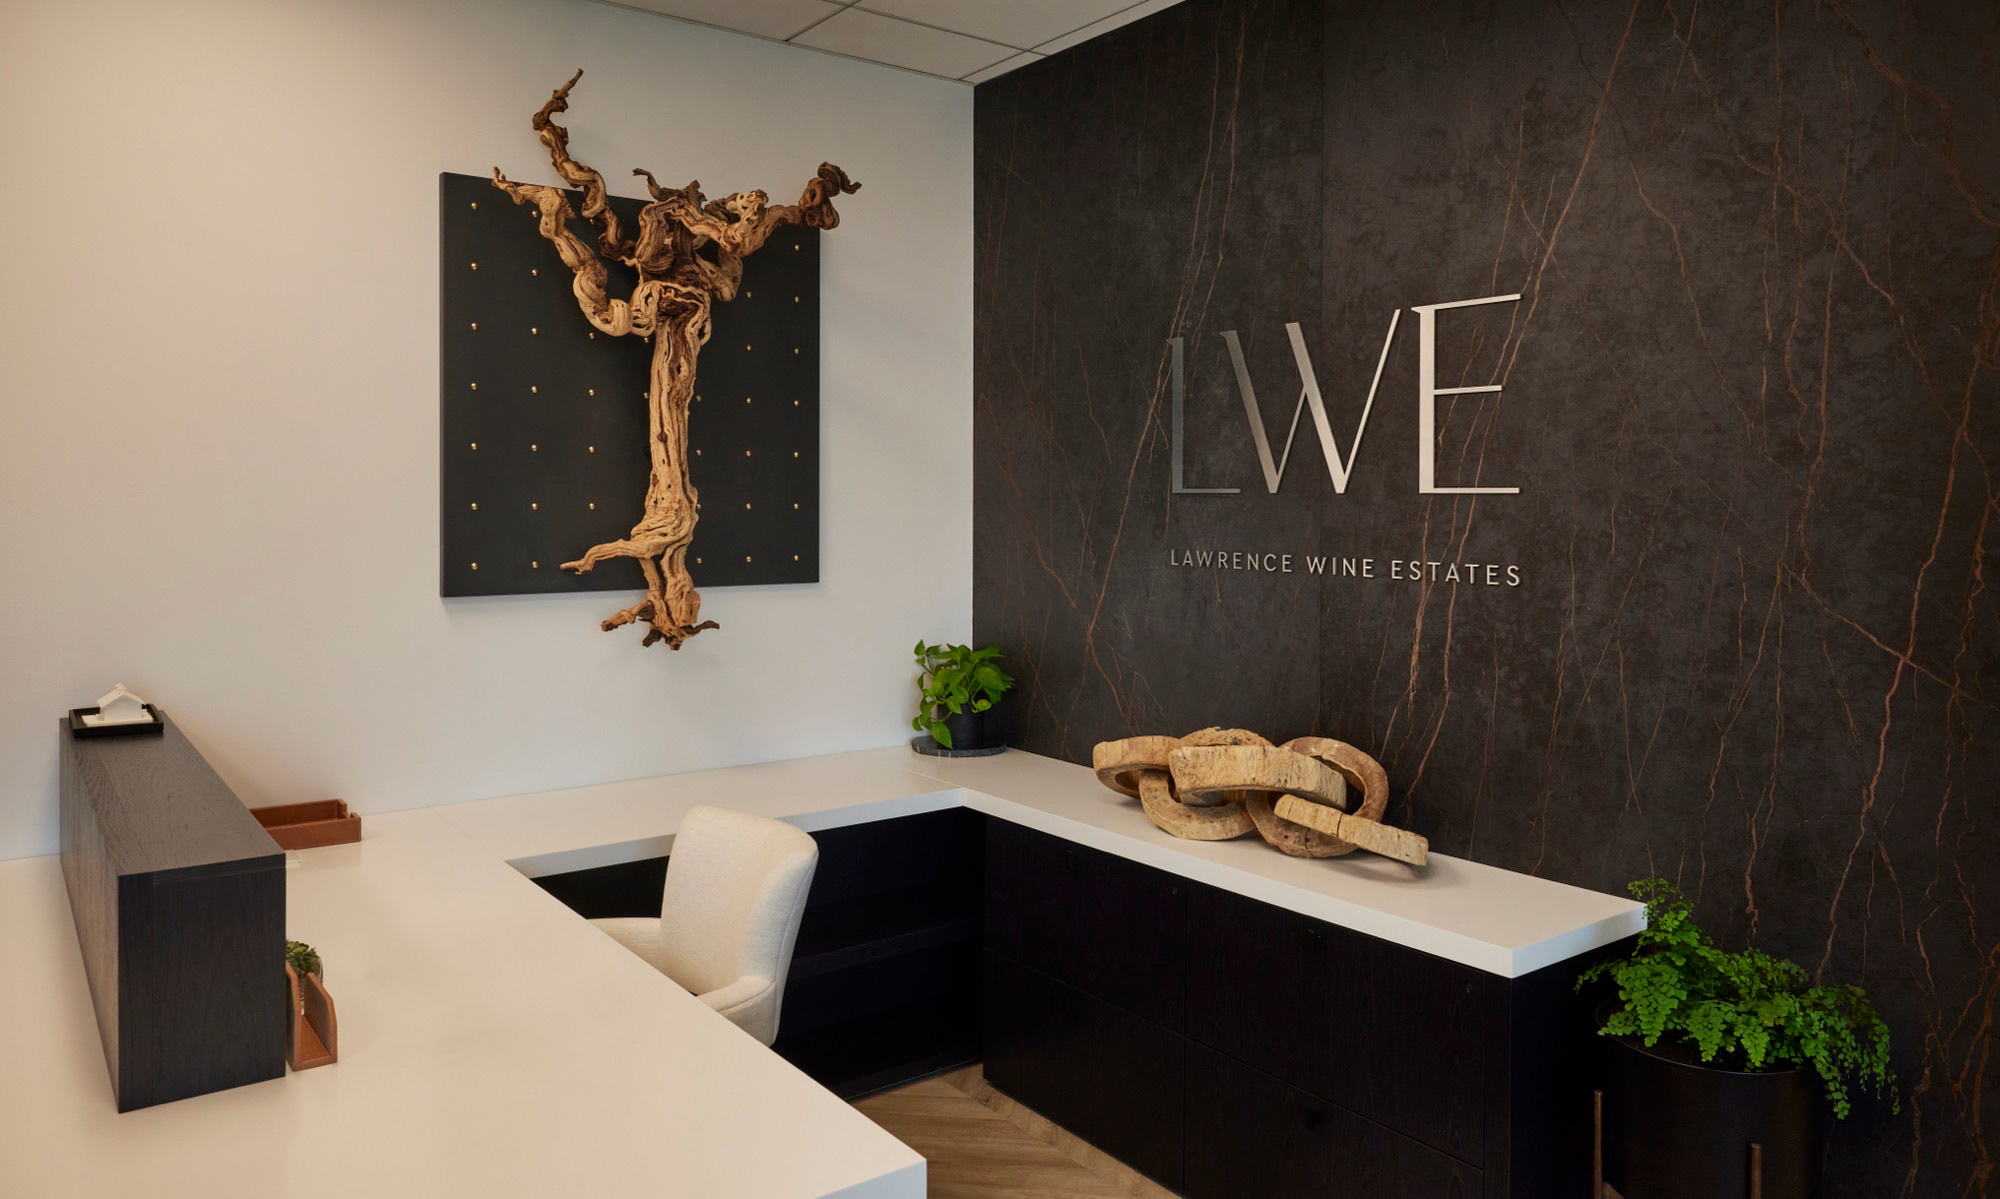 Image of Lawrence Wine Estates 7 in Sonoma interiors honors the legacy of Napa Valley in the Lawrence Wine Estate’s executive offices - Cosentino